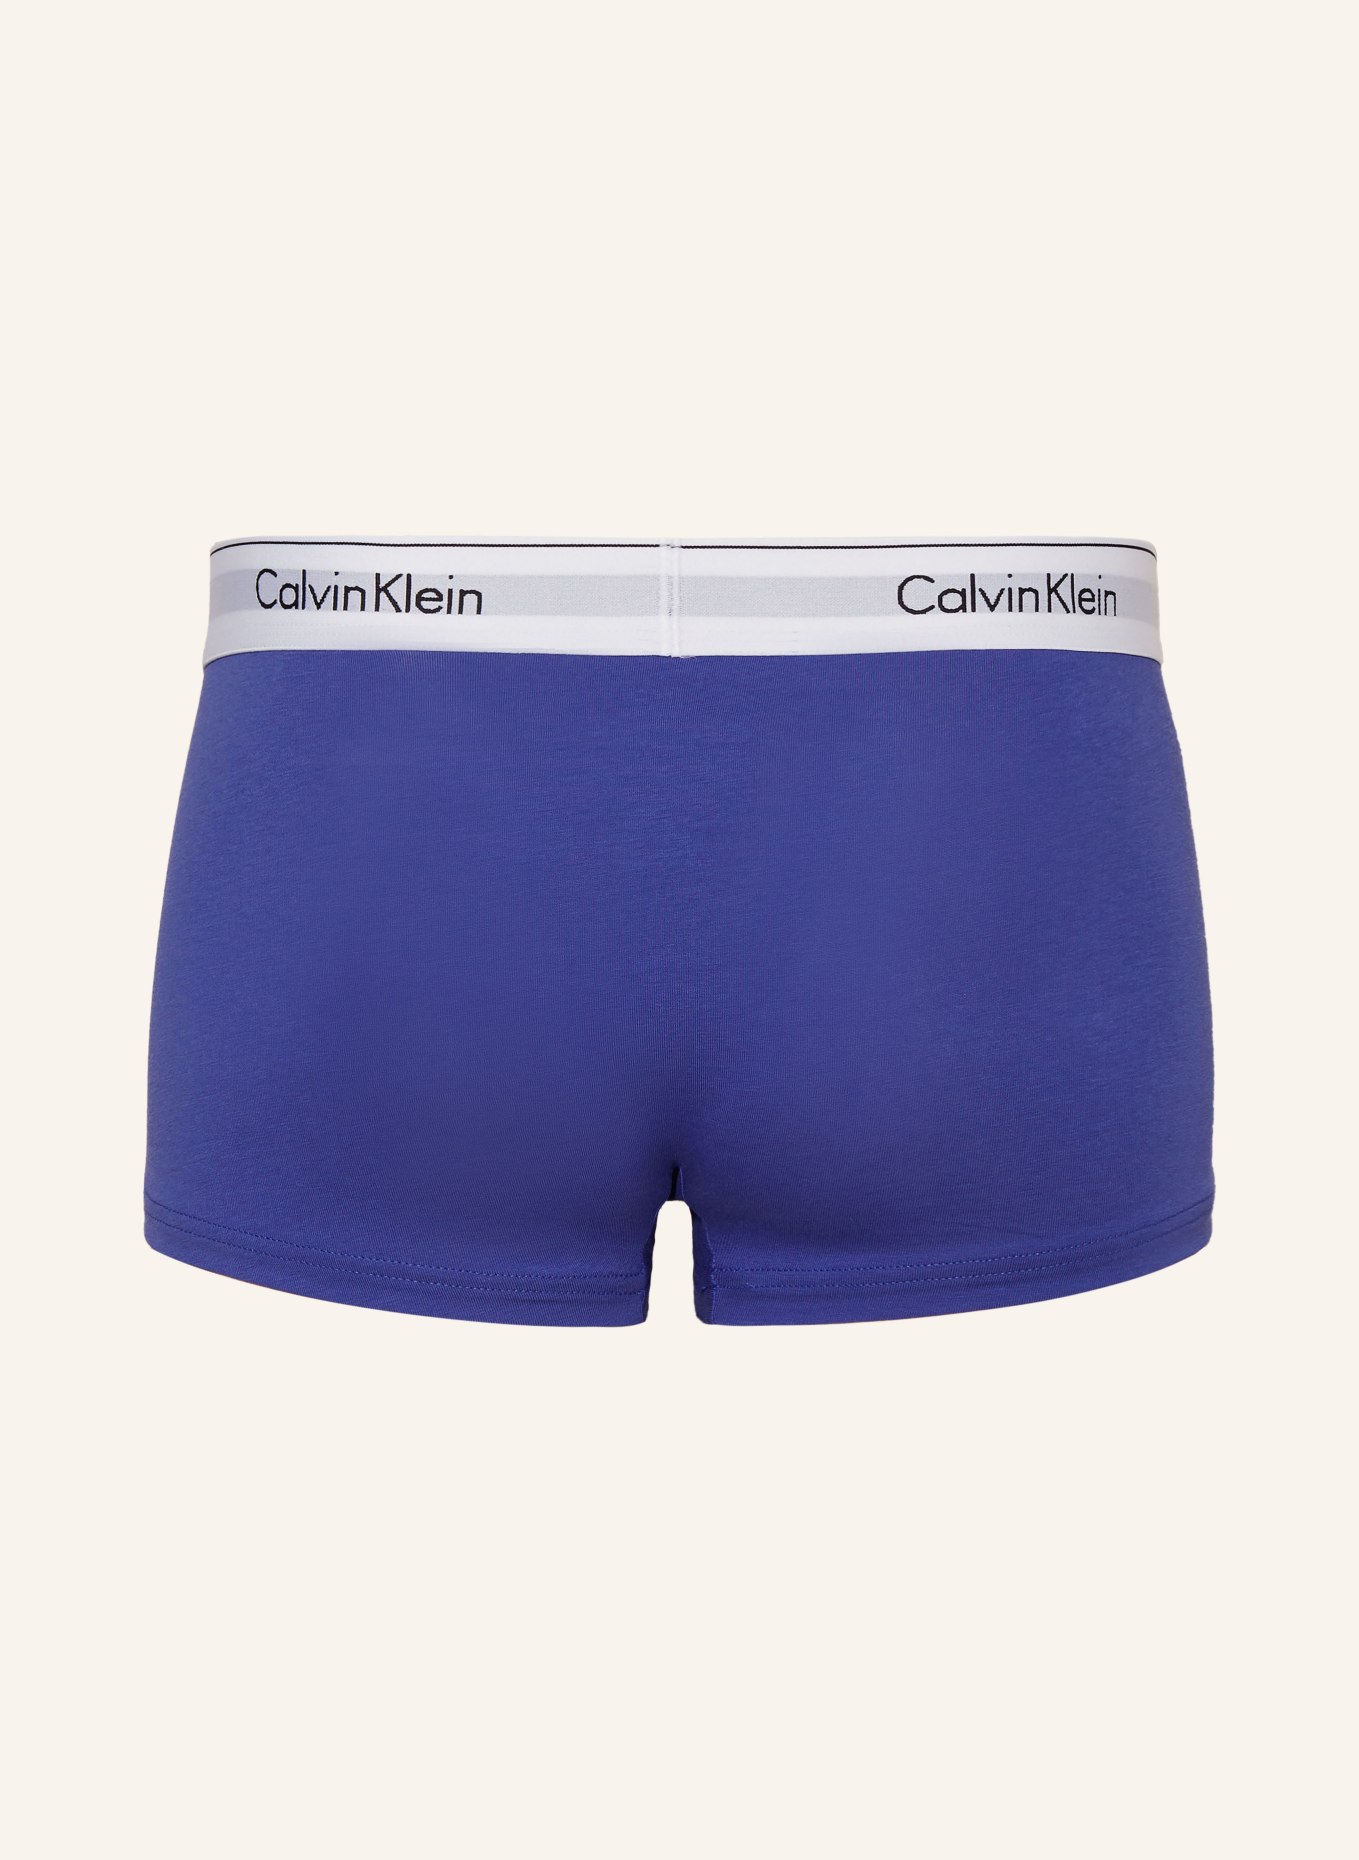 Calvin Klein 3-pack boxer shorts MODERN COTTON STRETCH low rise, Color: BLUE/ GRAY/ LIGHT GRAY (Image 2)